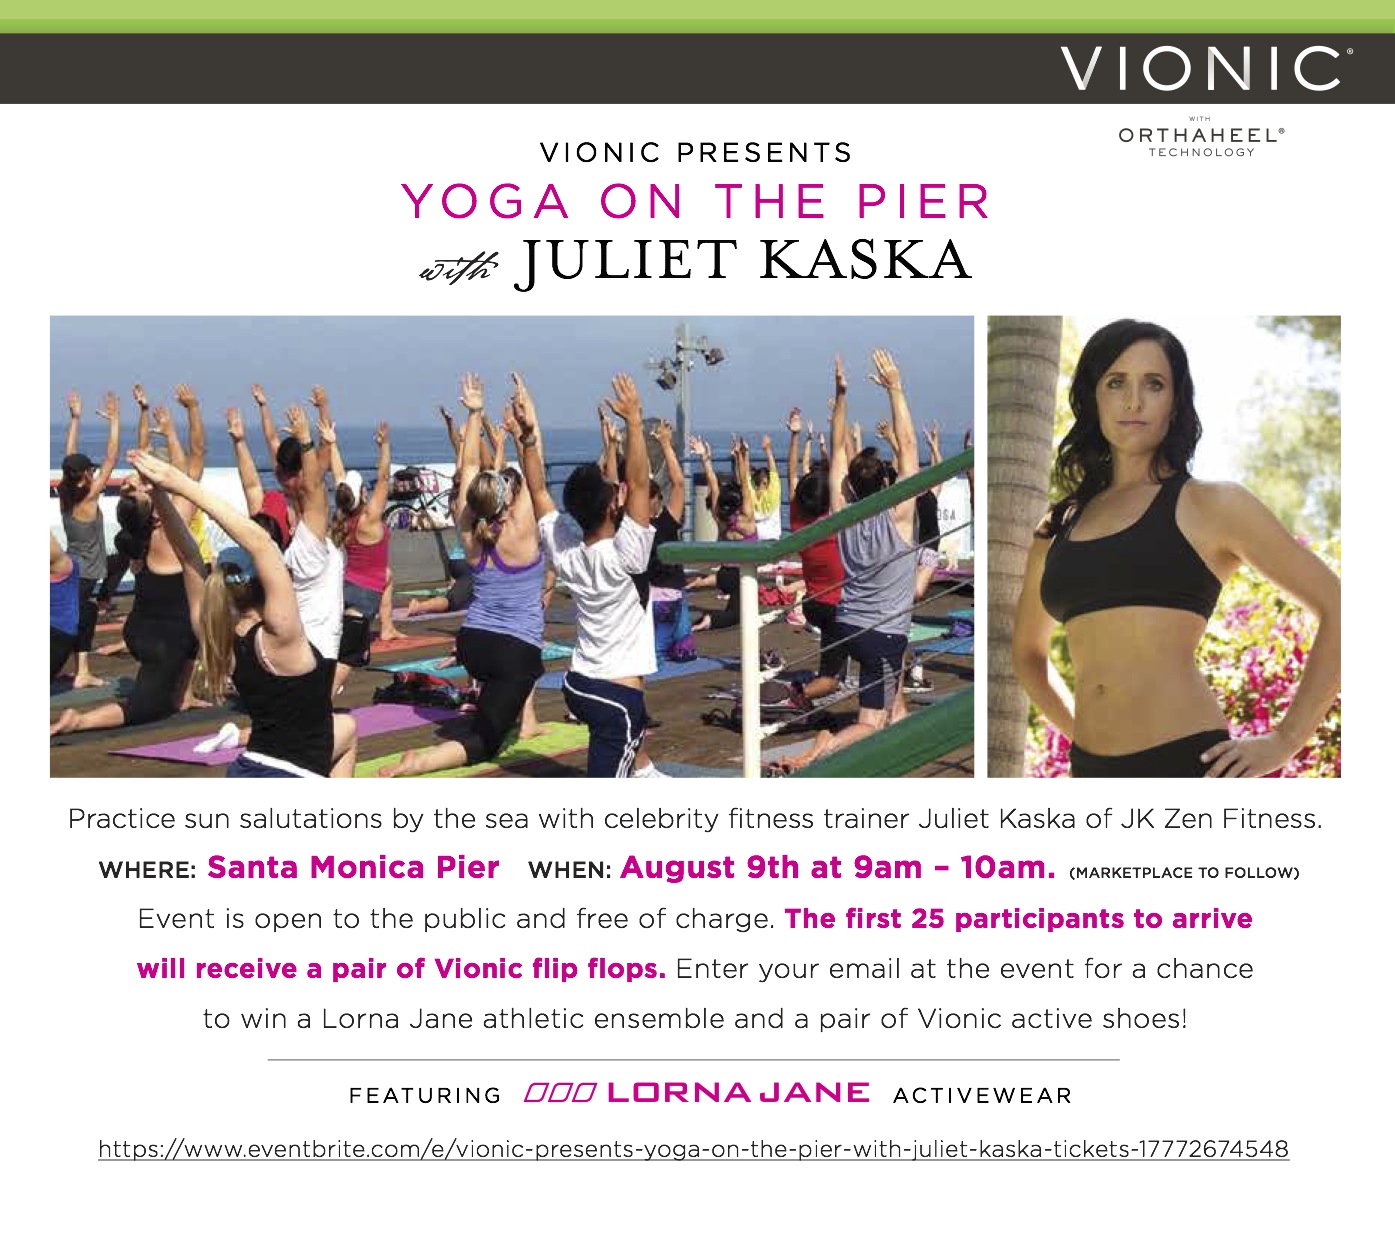 Vionic Presents: YOGA ON THE PIER with Juliet Kaska